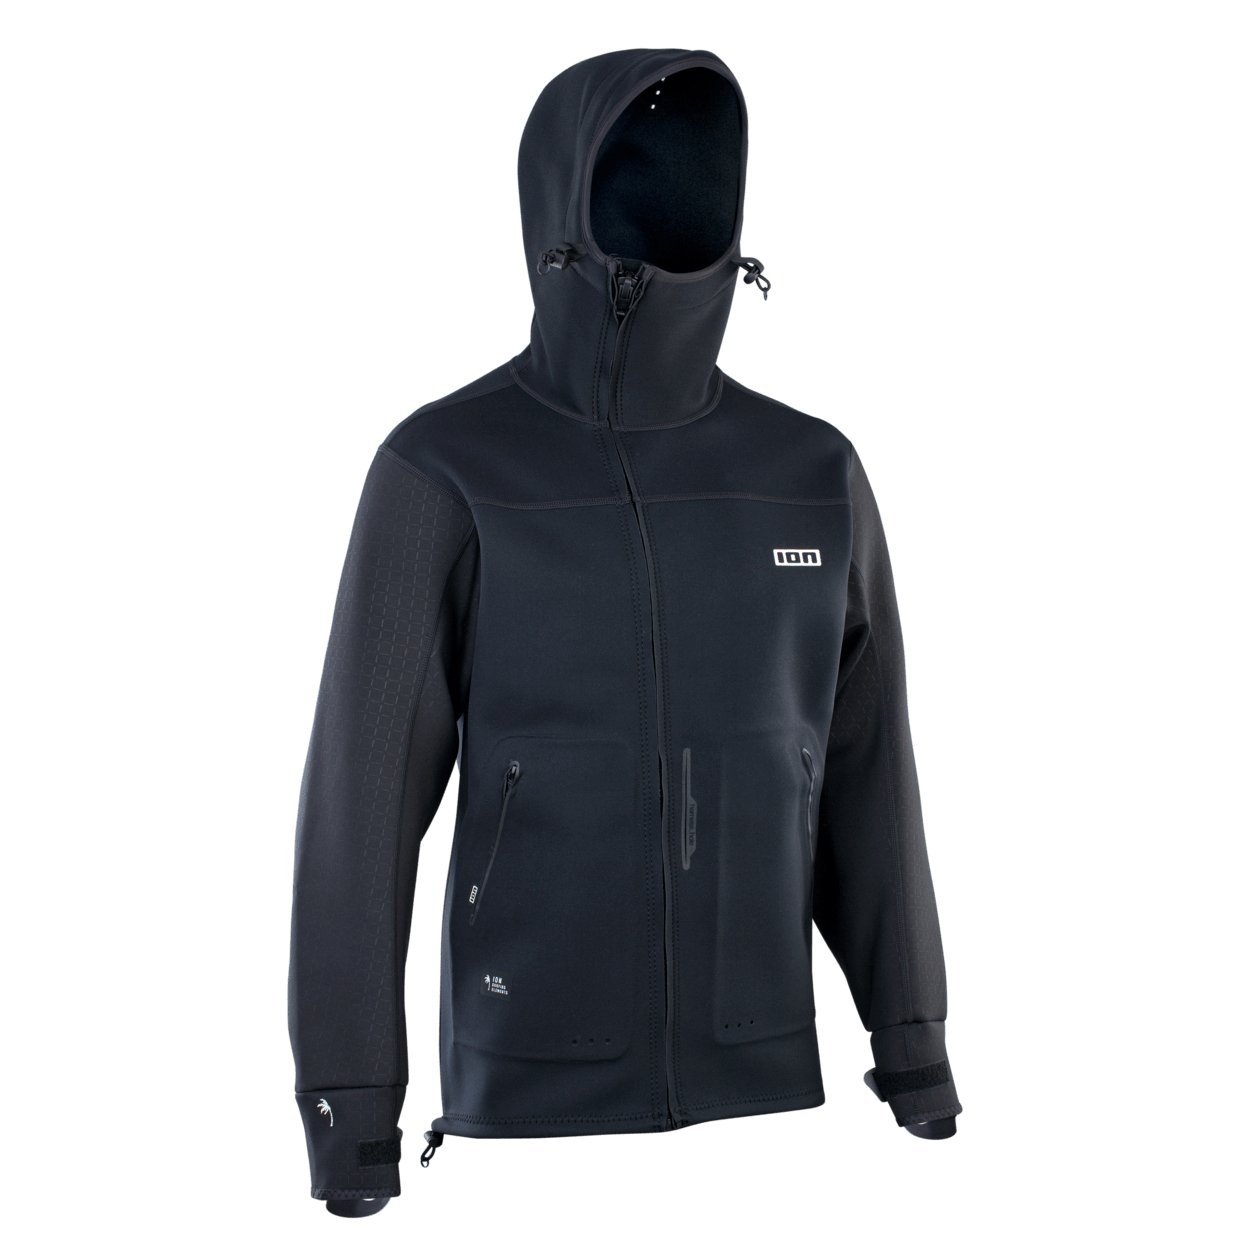 ION Neo Shelter Jacket Amp men 2022 - Worthing Watersports - 9010583052663 - Tops - ION Water